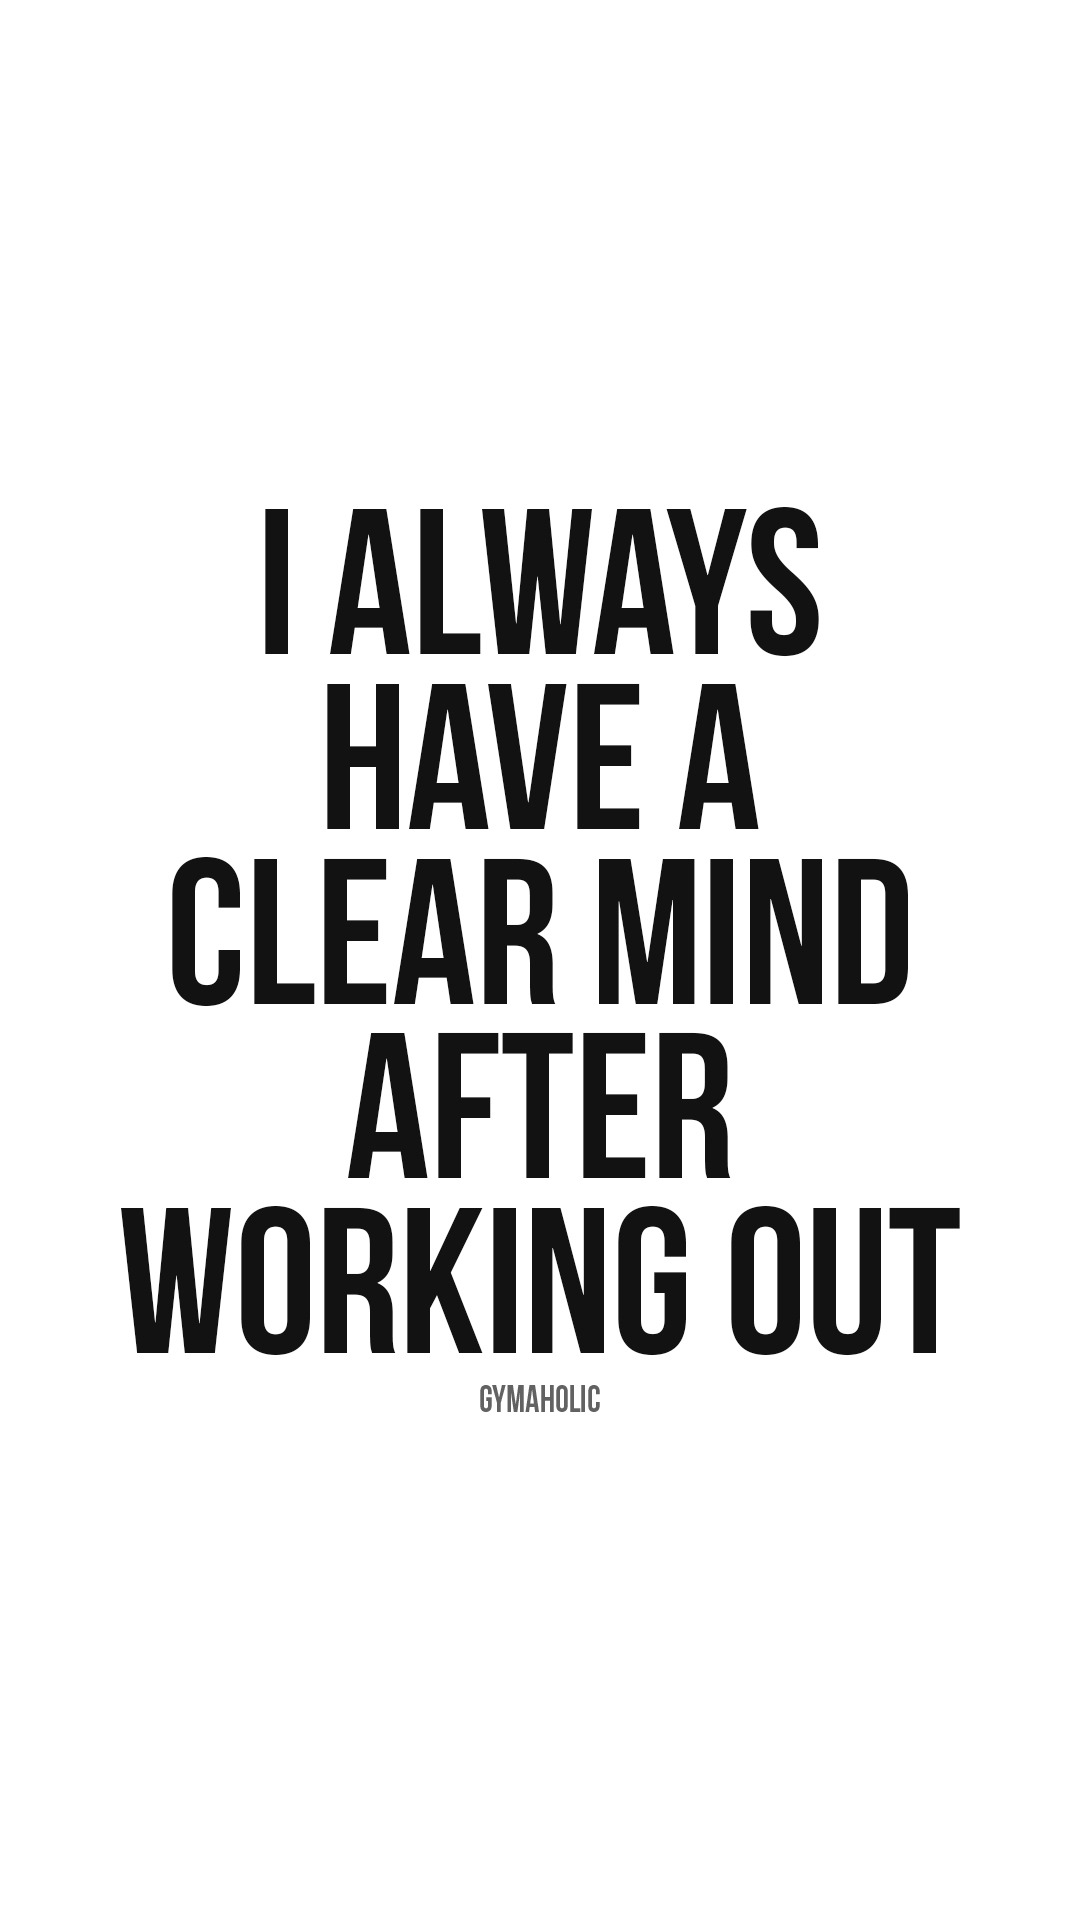 I always have a clear mind after working out